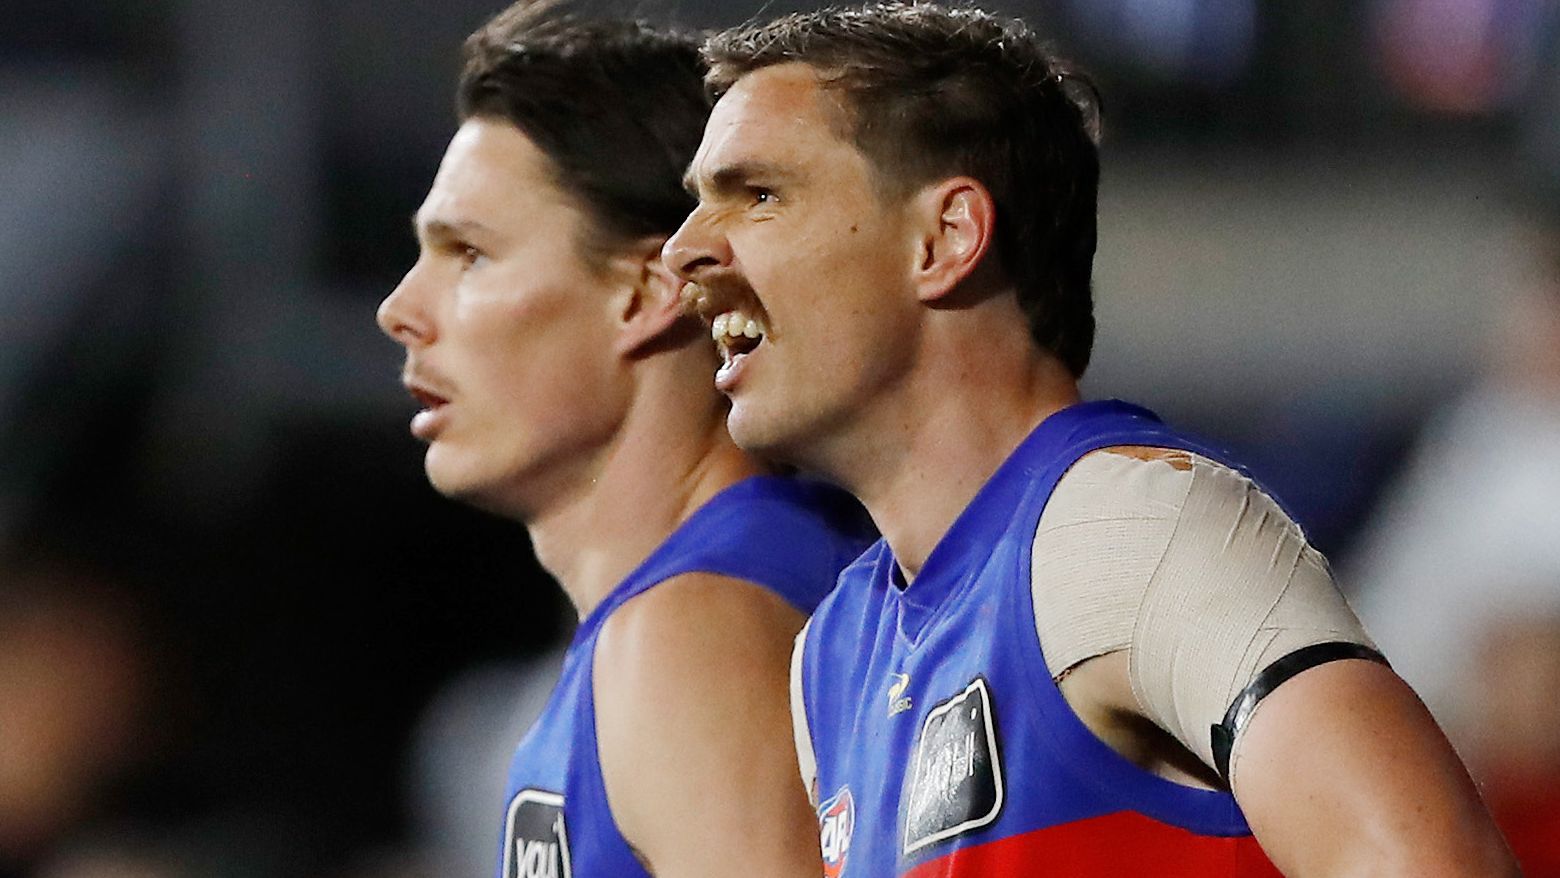 Eric Hipwood and Joe Daniher of the Lions are seen during the 2022 AFL First Preliminary Final match between the Geelong Cats and the Brisbane Lions at the Melbourne Cricket Ground on September 16, 2022 in Melbourne, Australia. (Photo by Dylan Burns/AFL Photos)